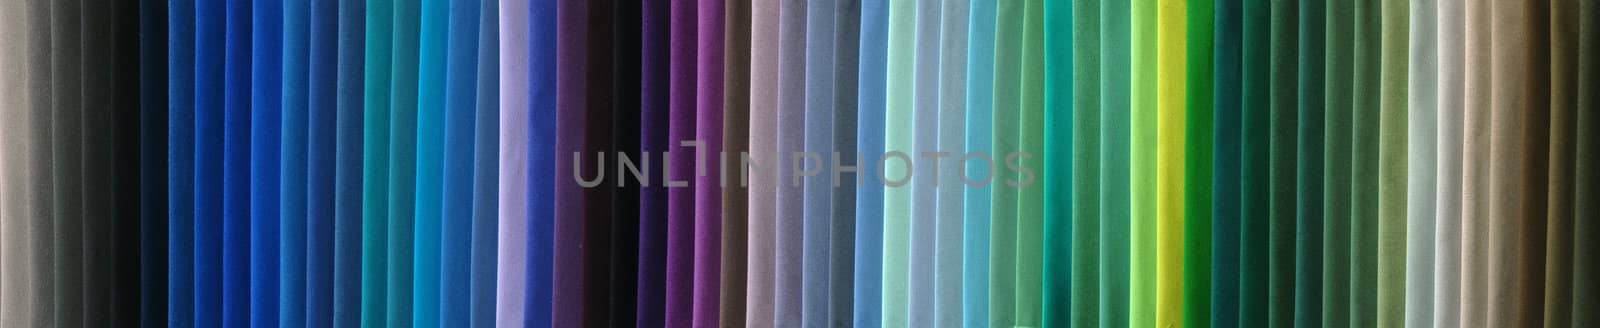 Fabric color samples by Vectorex